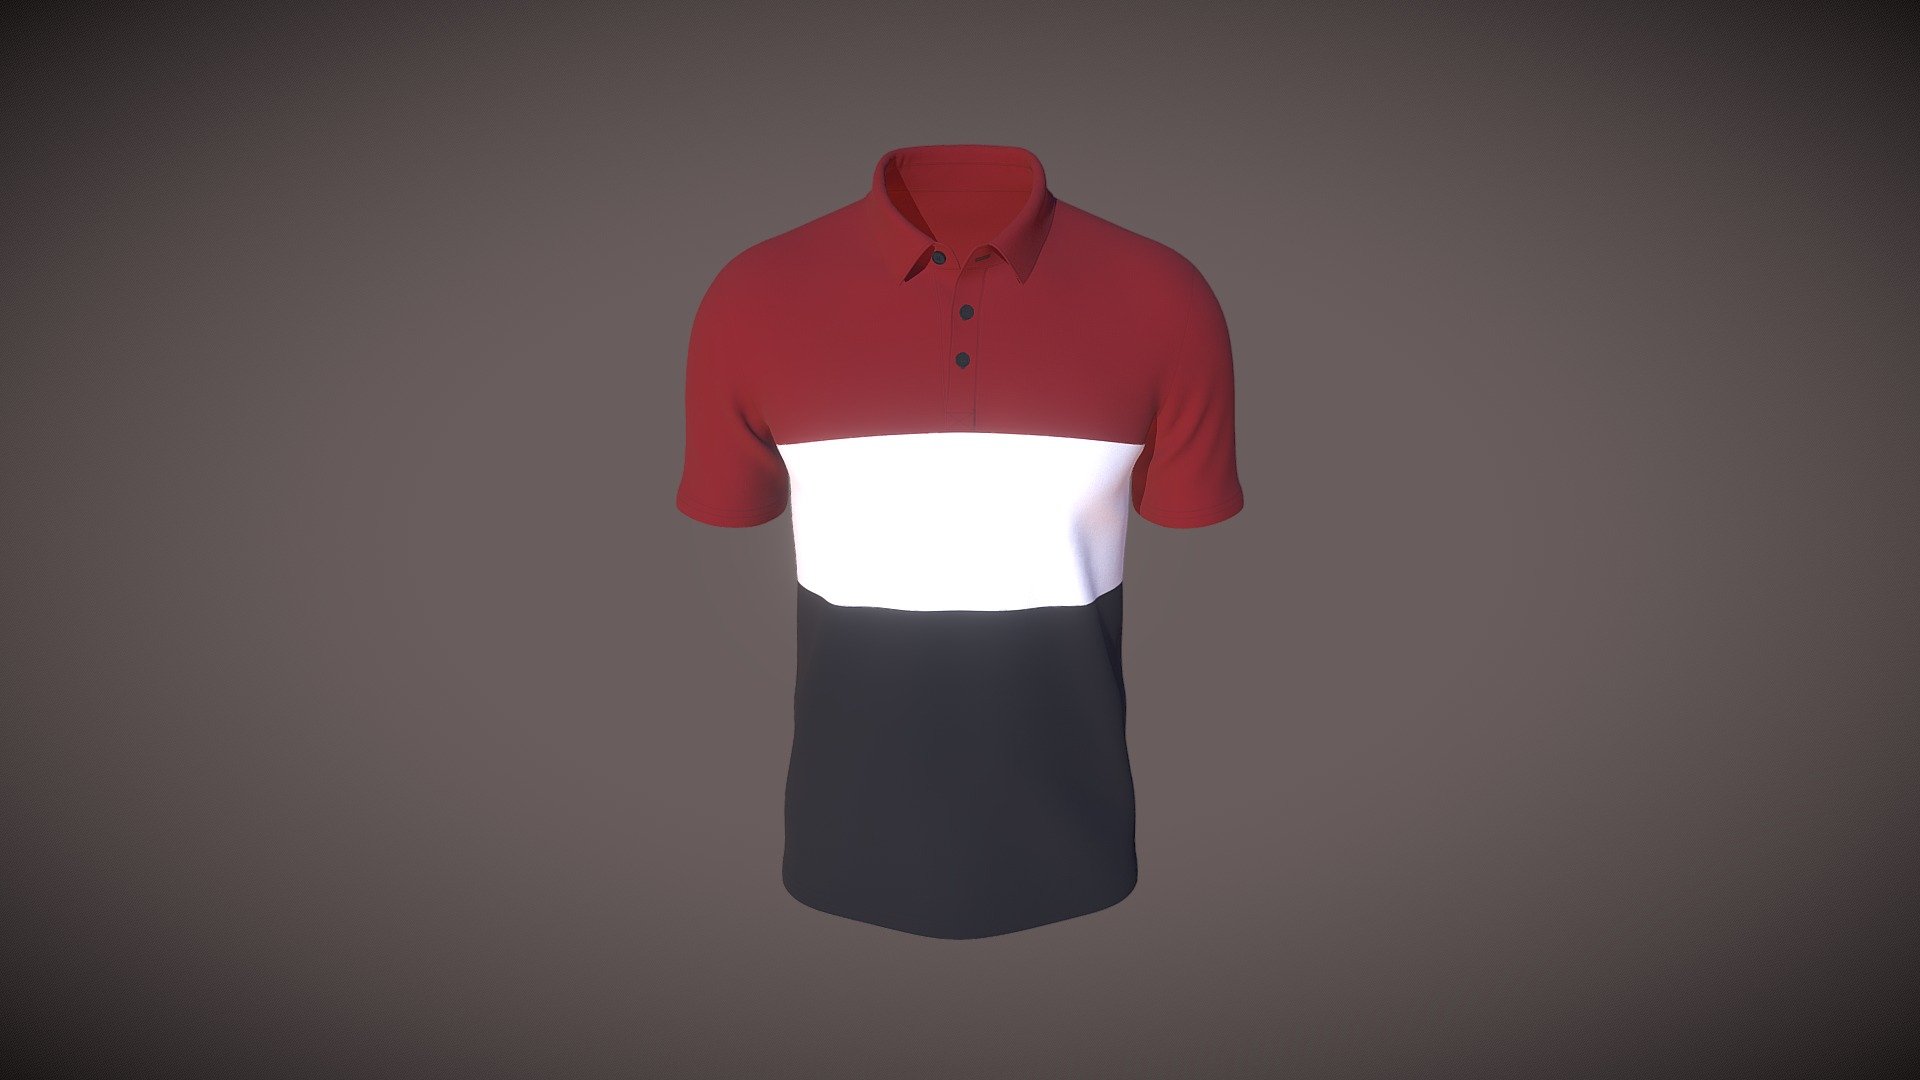 Cloth Title = Men's Regular Fit Polo Shirt Design 

SKU = DG100046 

Category = Unisex 

Product Type = Tee 

Cloth Length = Regular 

Body Fit = Loose Fit 

Occasion = Sportswear  

Sleeve Style = Sleeveless 


Our Services:

3D Apparel Design.

OBJ,FBX,GLTF Making with High/Low Poly.

Fabric Digitalization.

Mockup making.

3D Teck Pack.

Pattern Making.

2D Illustration

Cloth Animation and 360 Spin Video


Contact us:- 

Email: info@digitalfashionwear.com 

Website: https://digitalfashionwear.com 

WhatsApp No: +8801759350445 


We designed all the types of cloth specially focused on product visualization, e-commerce, fitting, and production. 

We will design: 

T-shirts 

Polo shirts 

Hoodies 

Sweatshirt 

Jackets 

Shirts 

TankTops 

Trousers 

Bras 

Underwear 

Blazer 

Aprons 

Leggings 

and All Fashion items. 





Our goal is to make sure what we provide you, meets your demand 3d model